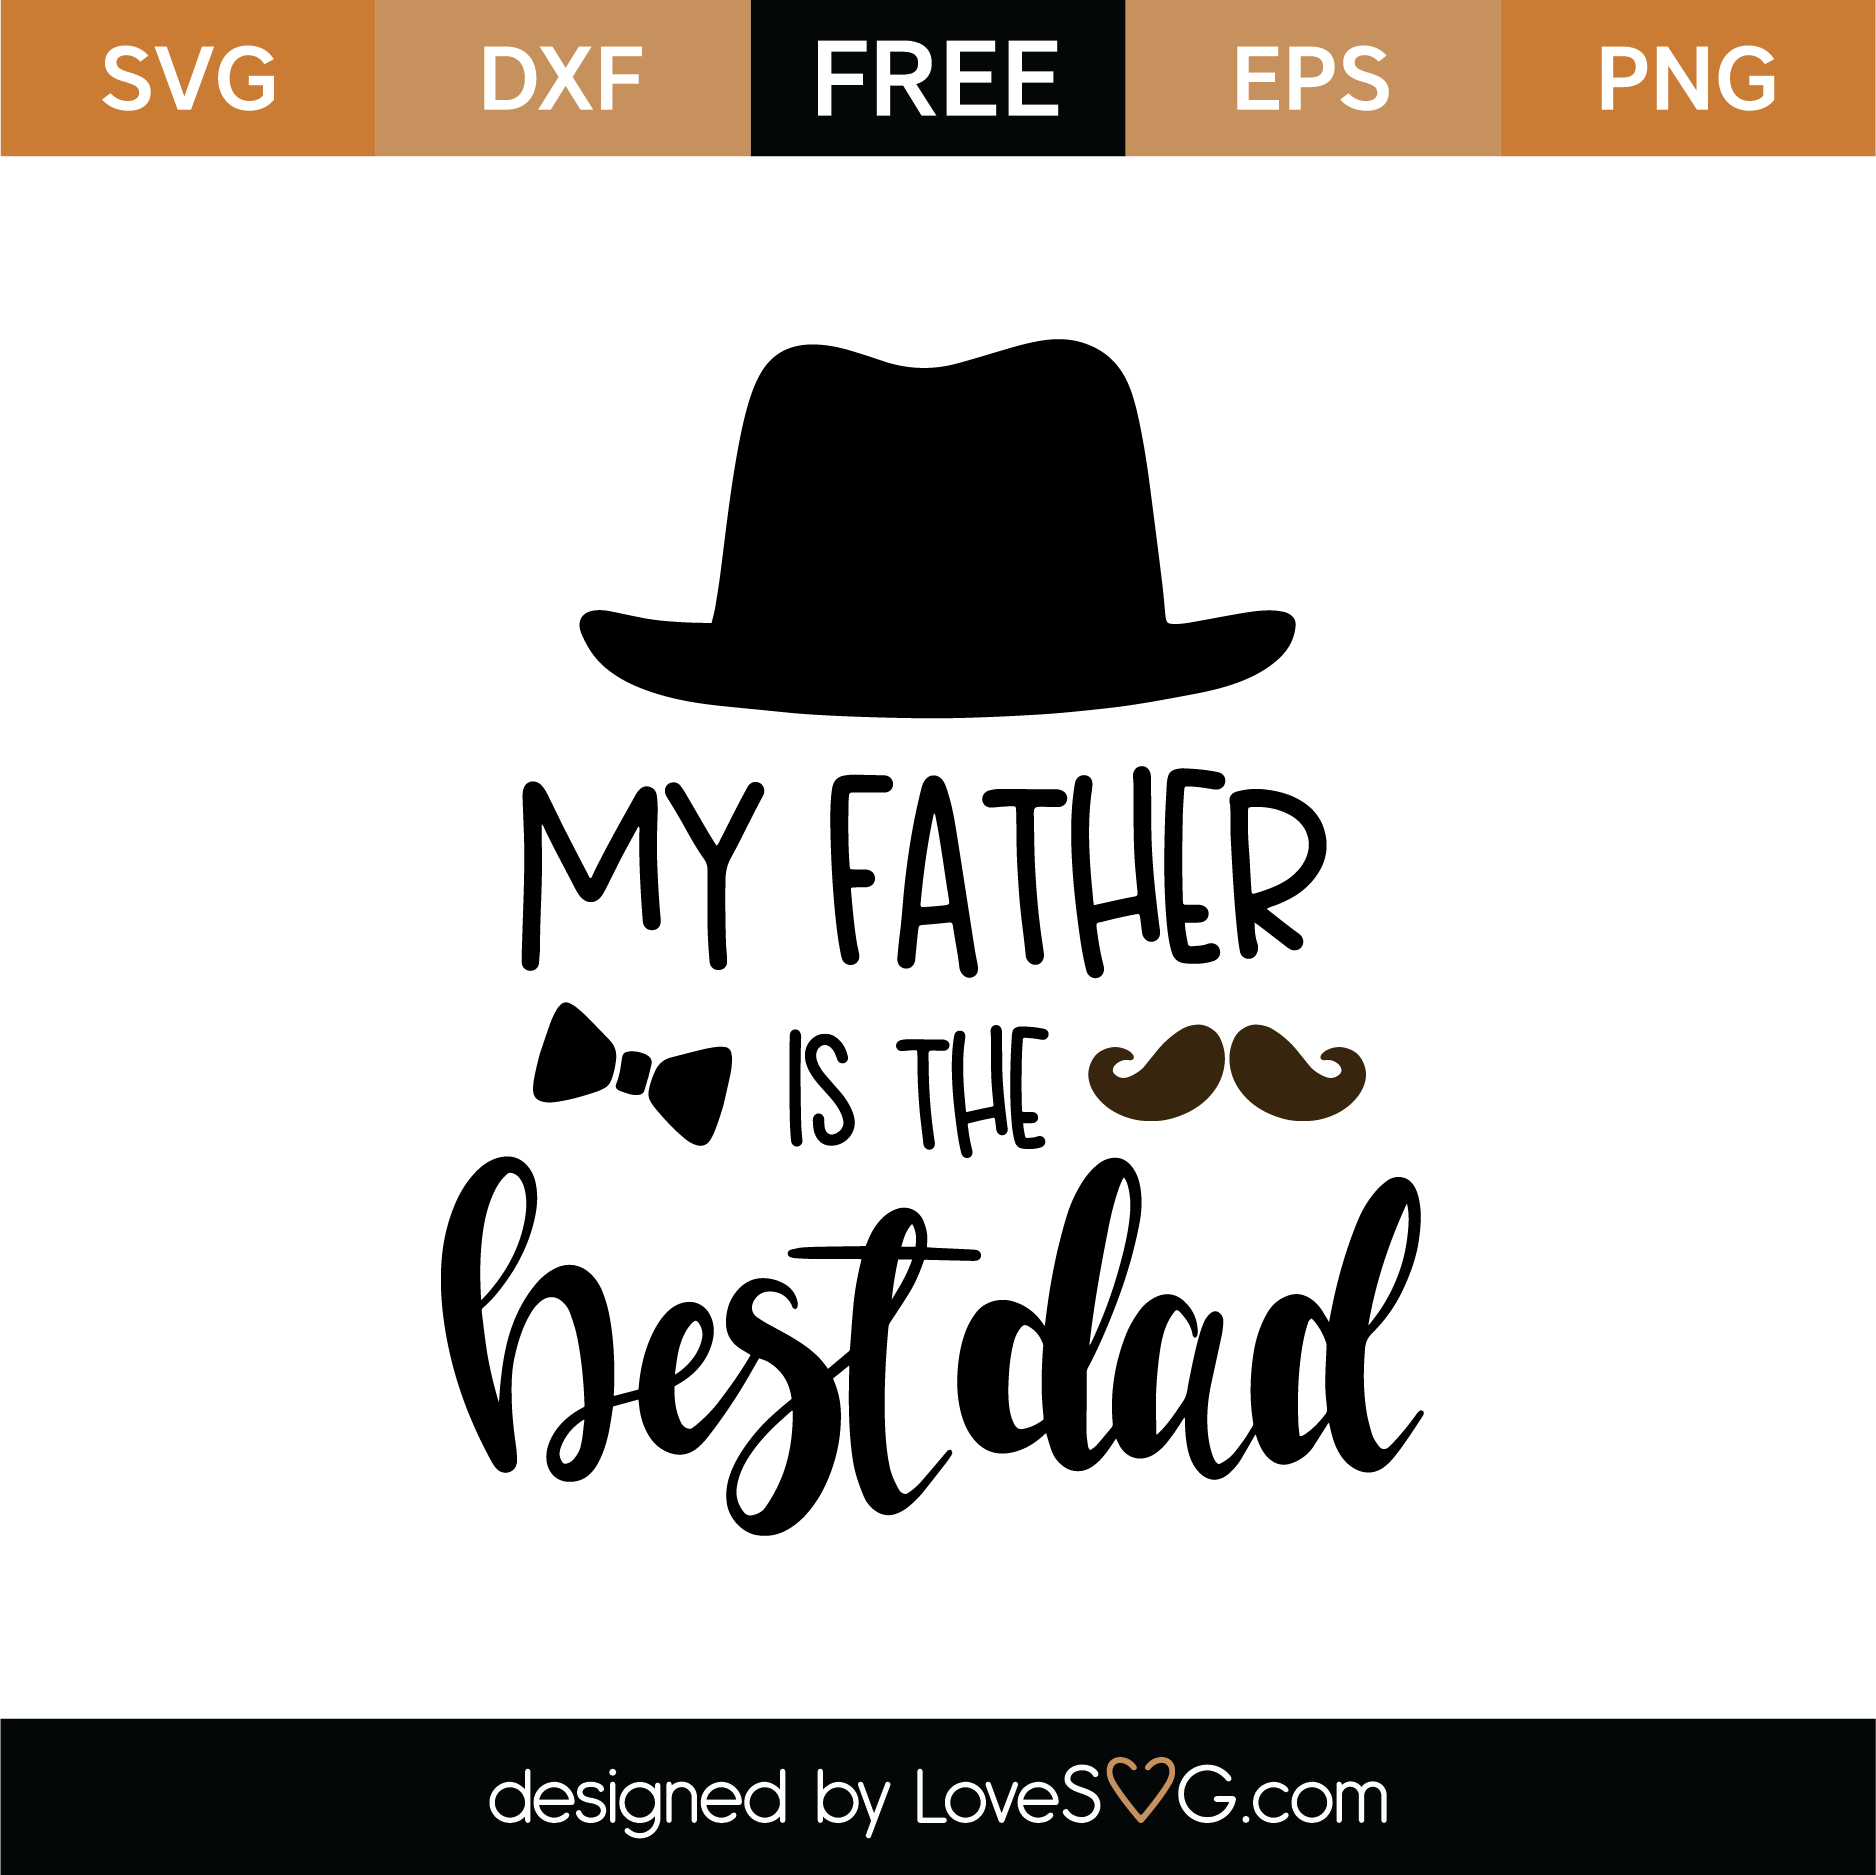 Download Free My Father Is The Best Dad SVG Cut File | Lovesvg.com